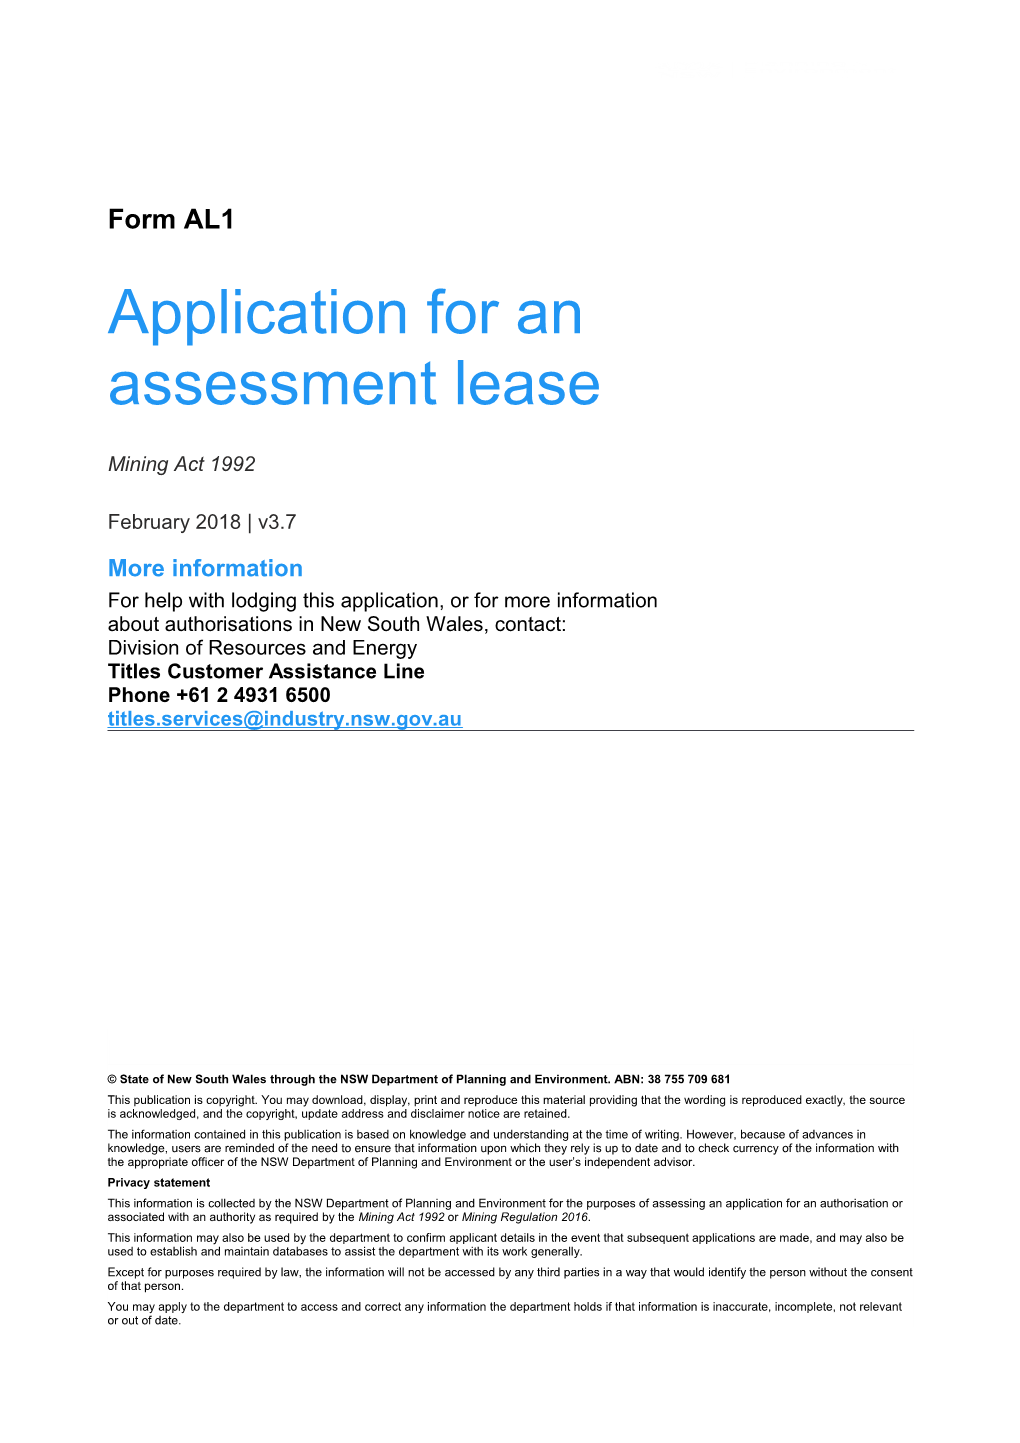 AL1 Application for an Assessment Lease